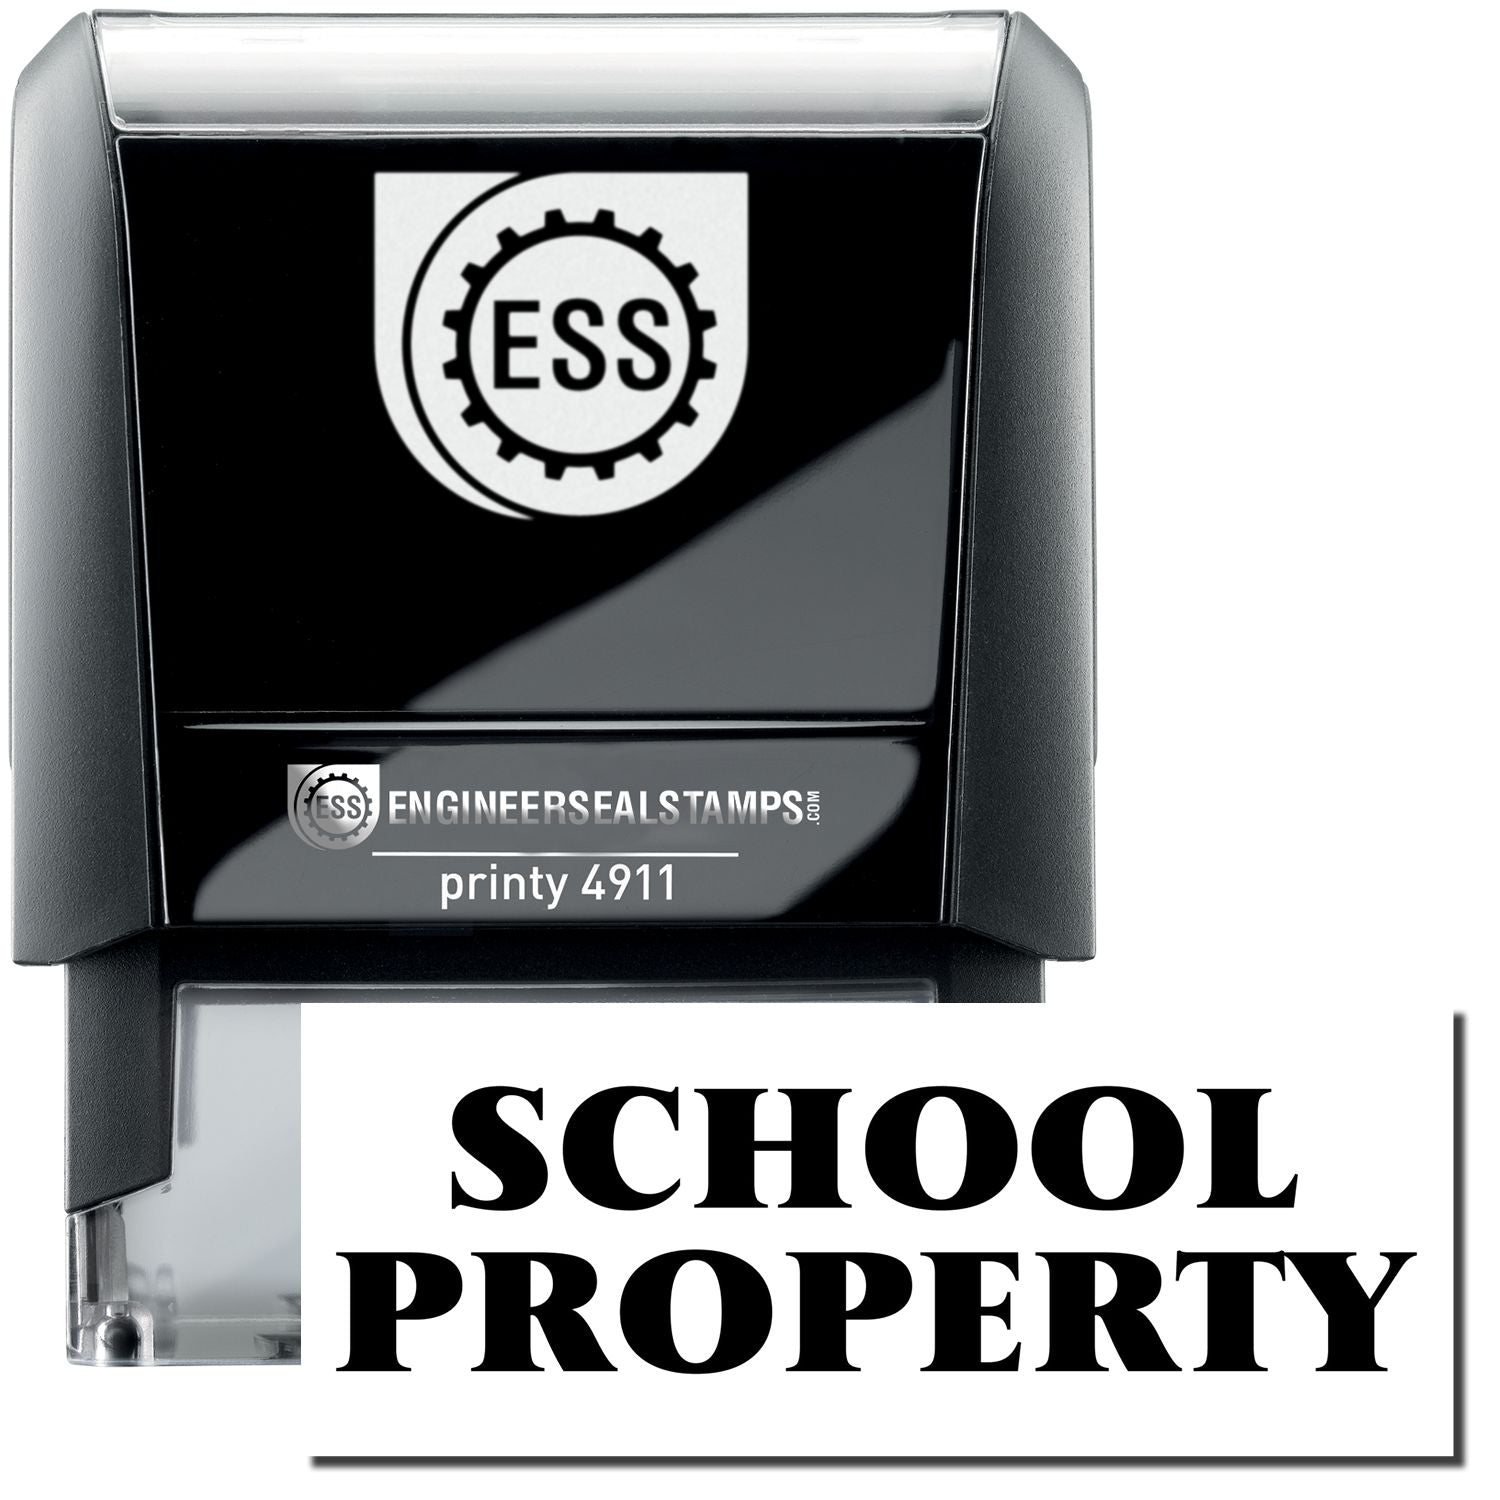 A self-inking stamp with a stamped image showing how the text "SCHOOL PROPERTY" is displayed after stamping.